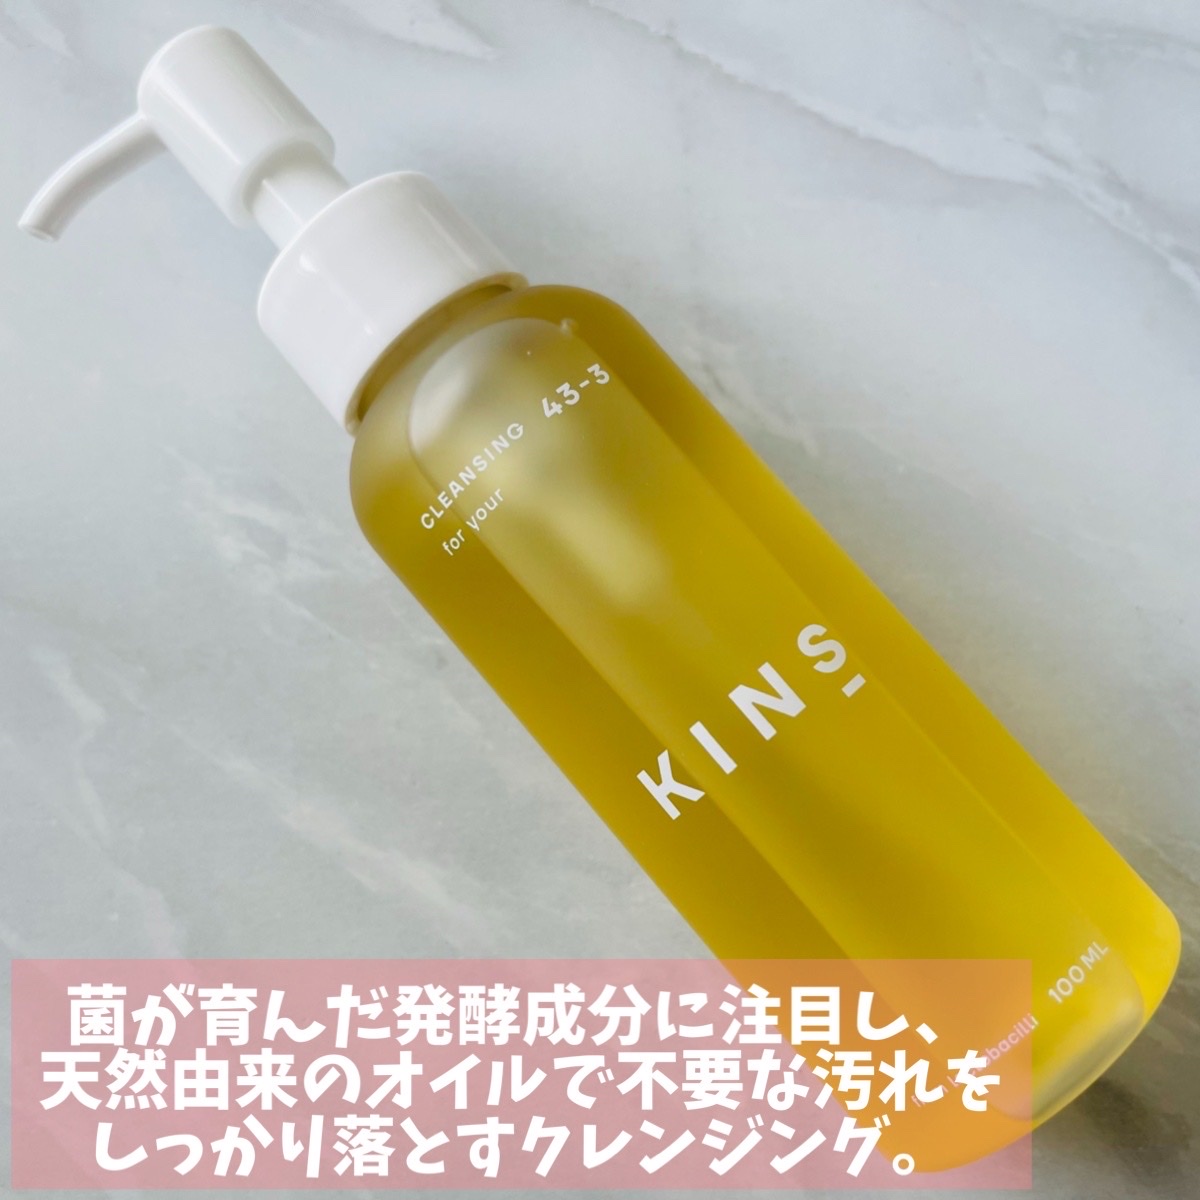 KINS / KINS CLEANSING OILの公式商品情報｜美容・化粧品情報はアット